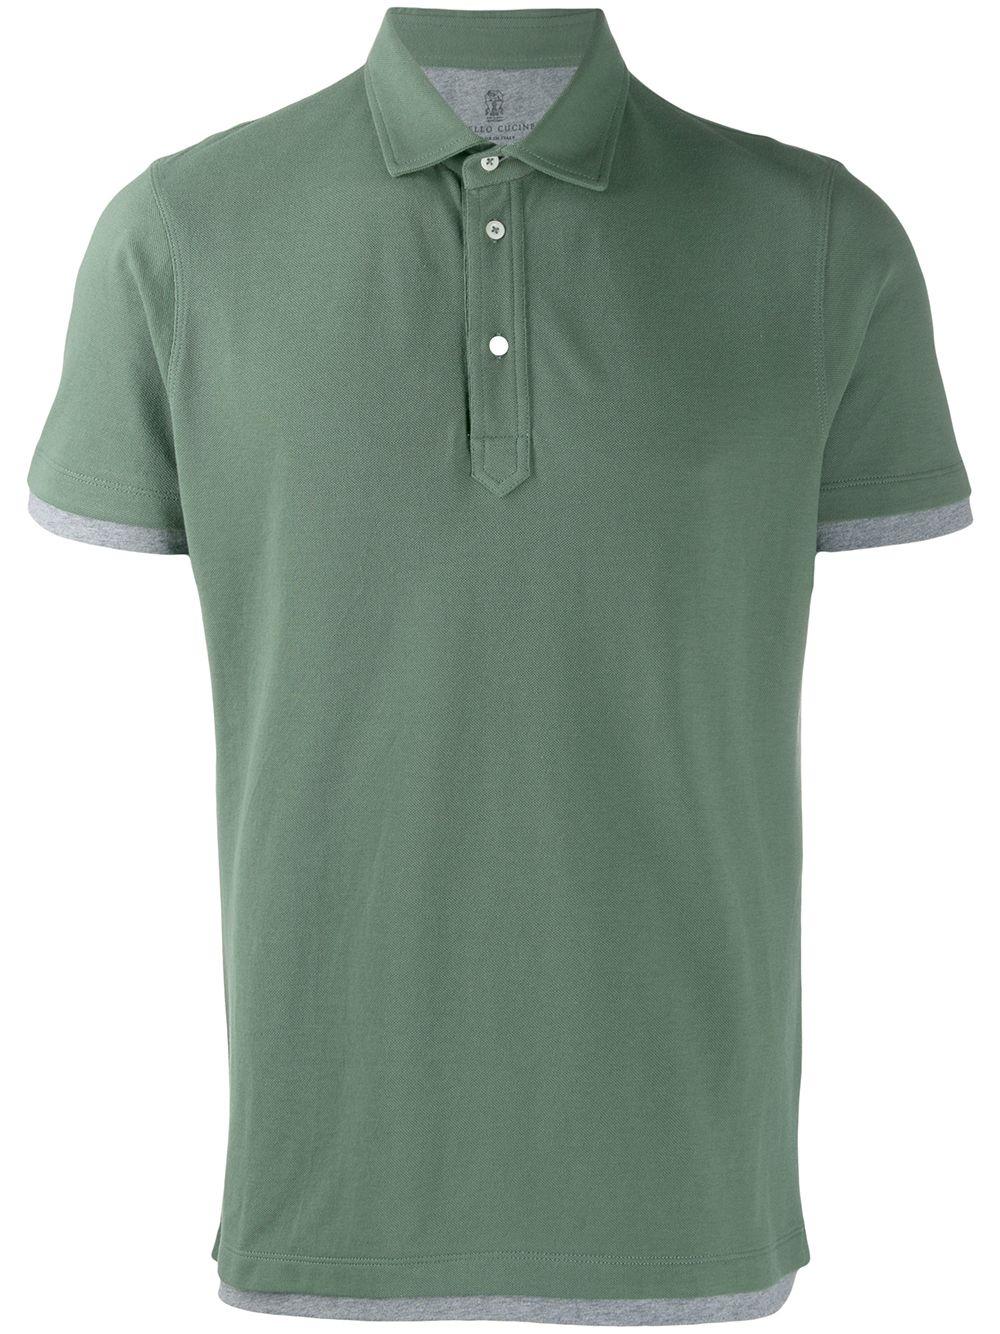 Brunello Cucinelli Cotton Layered-effect Polo Shirt in Green for Men - Lyst